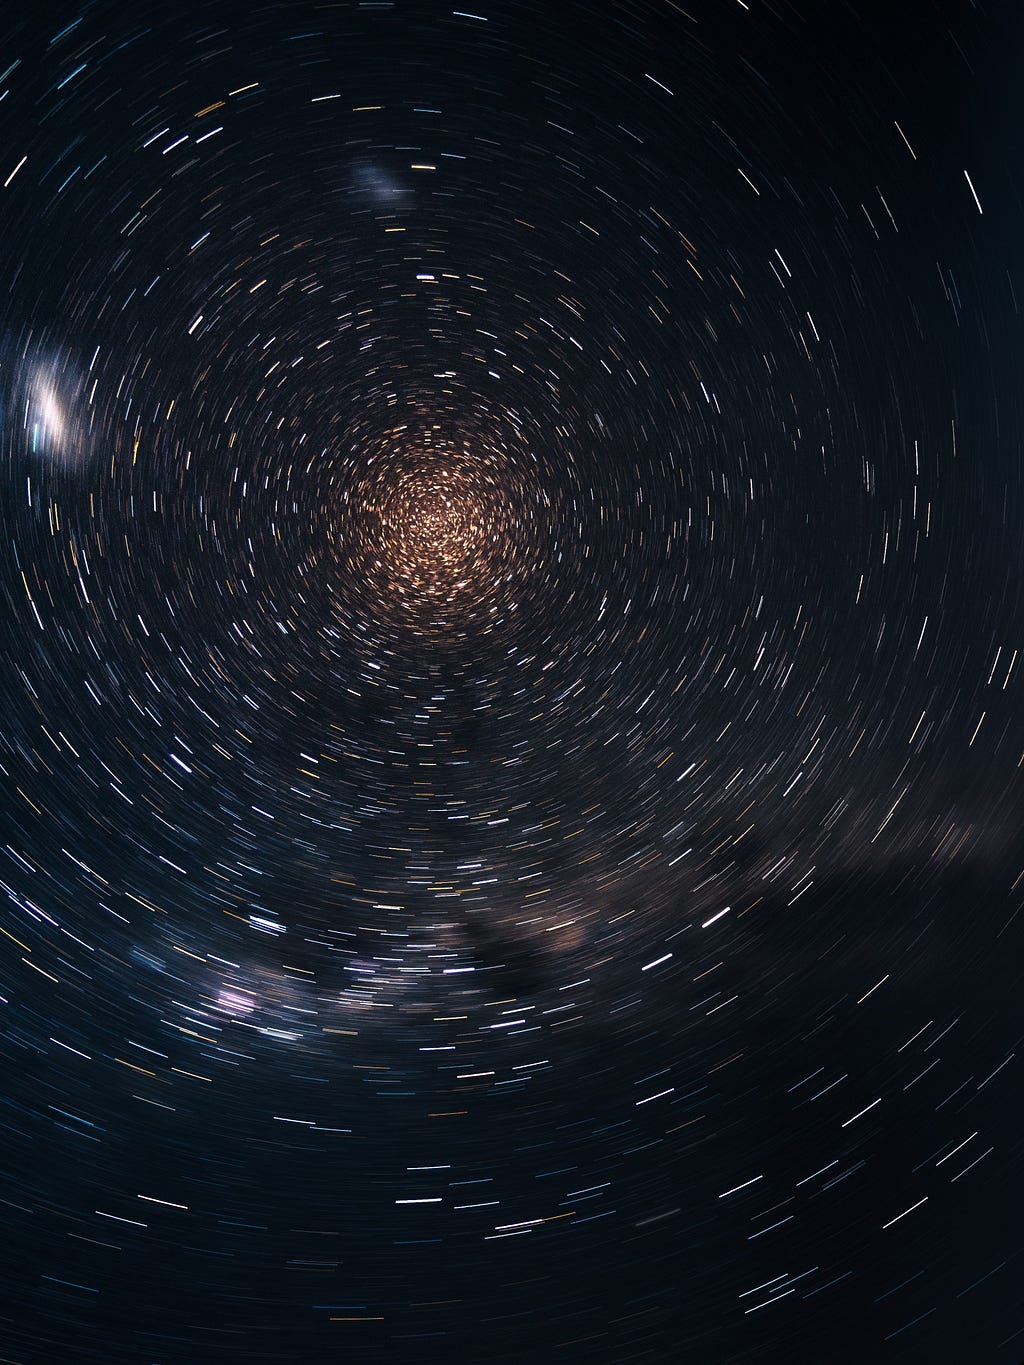 A swirling image of stars from a long exposure lens — photo courtesy of Mark Piwnicki on Unsplash